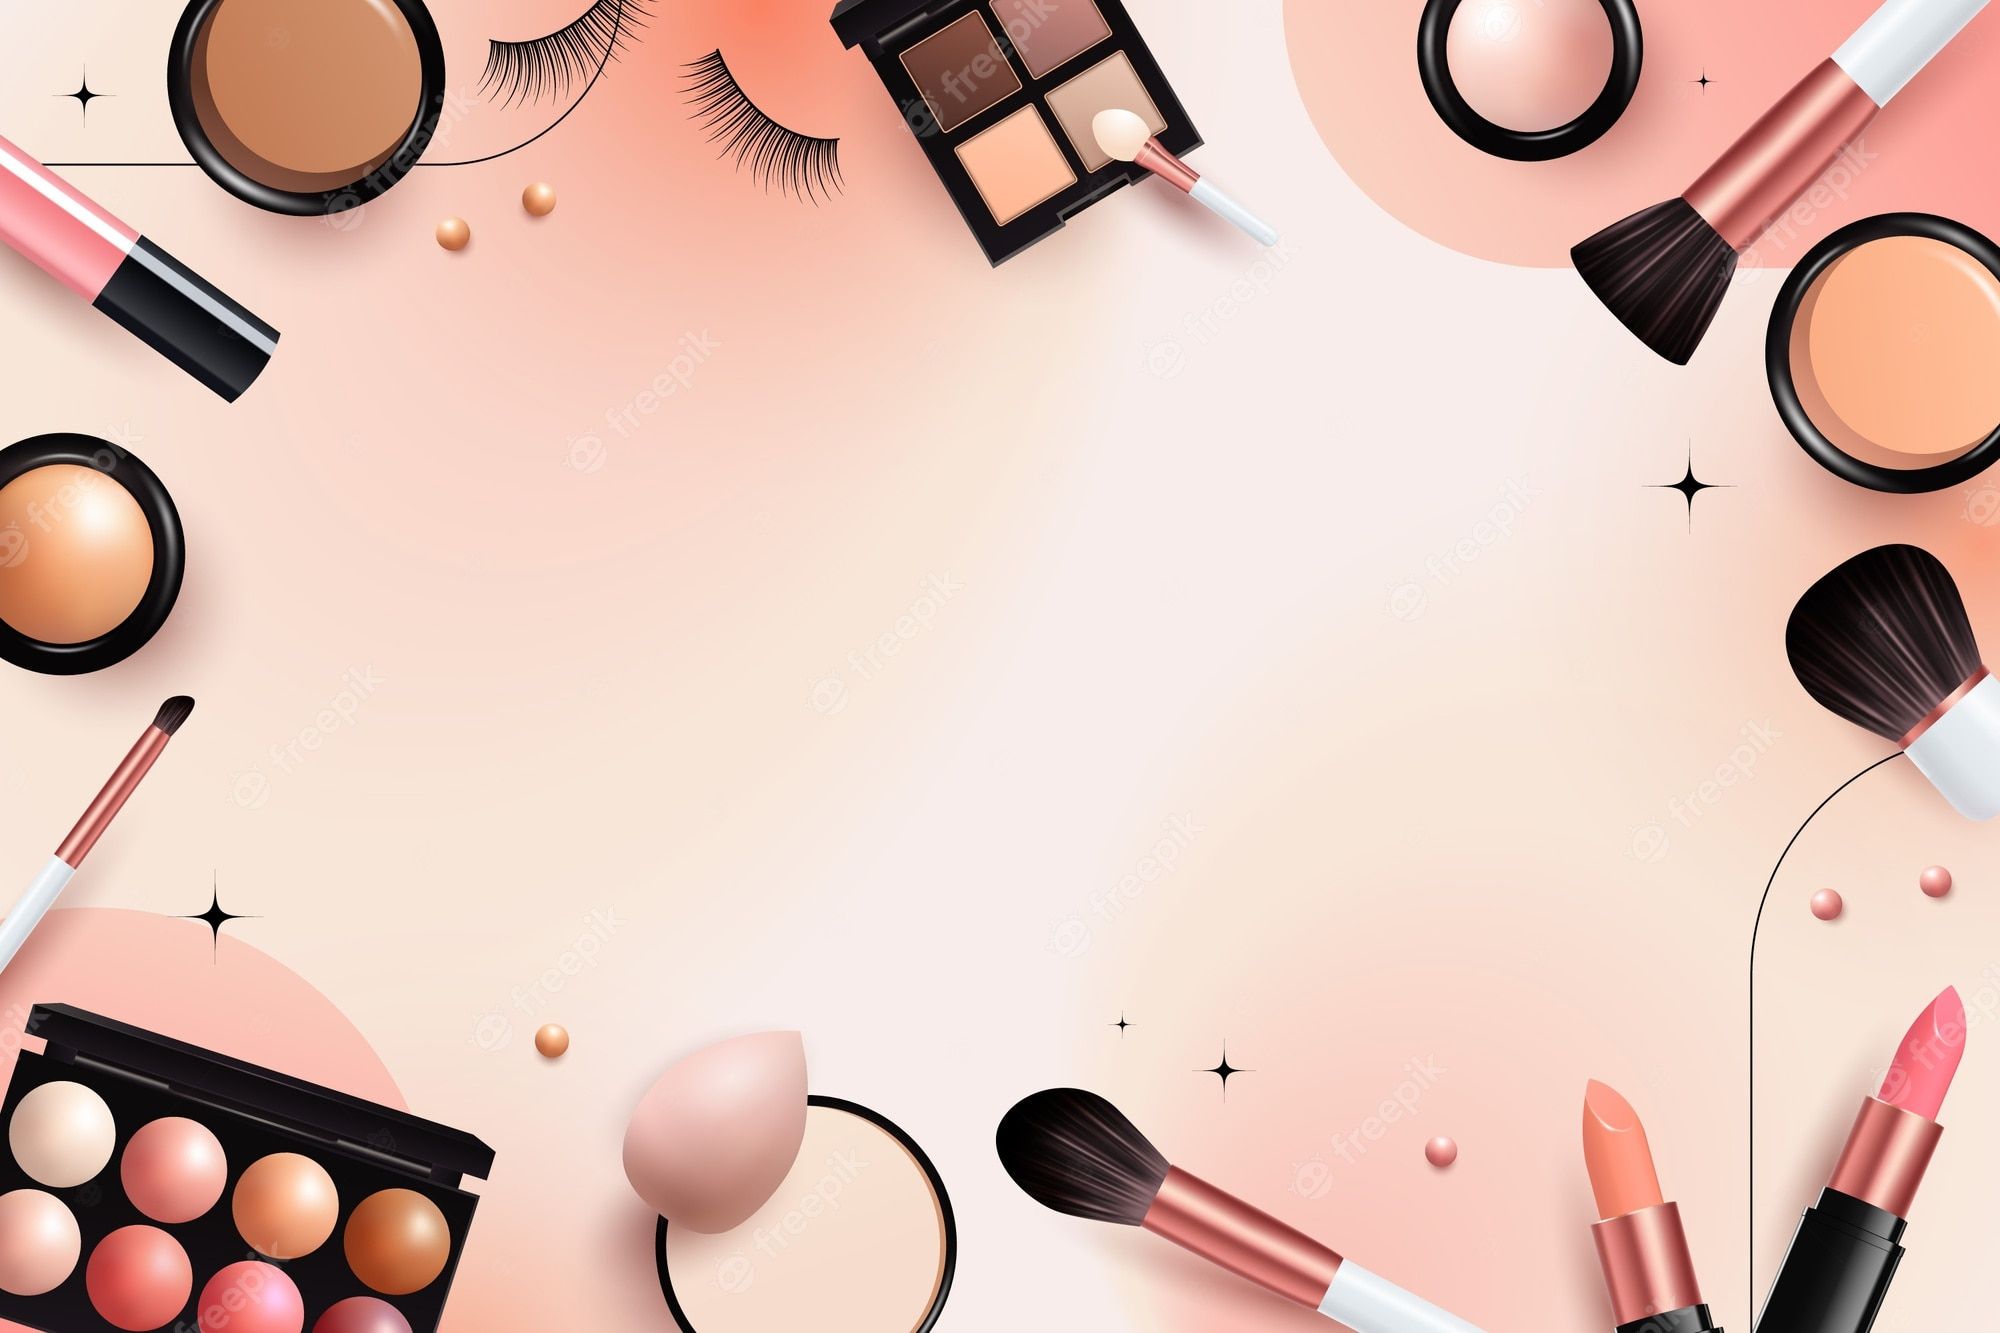 Various makeup products arranged in a circle on a pink background - Makeup